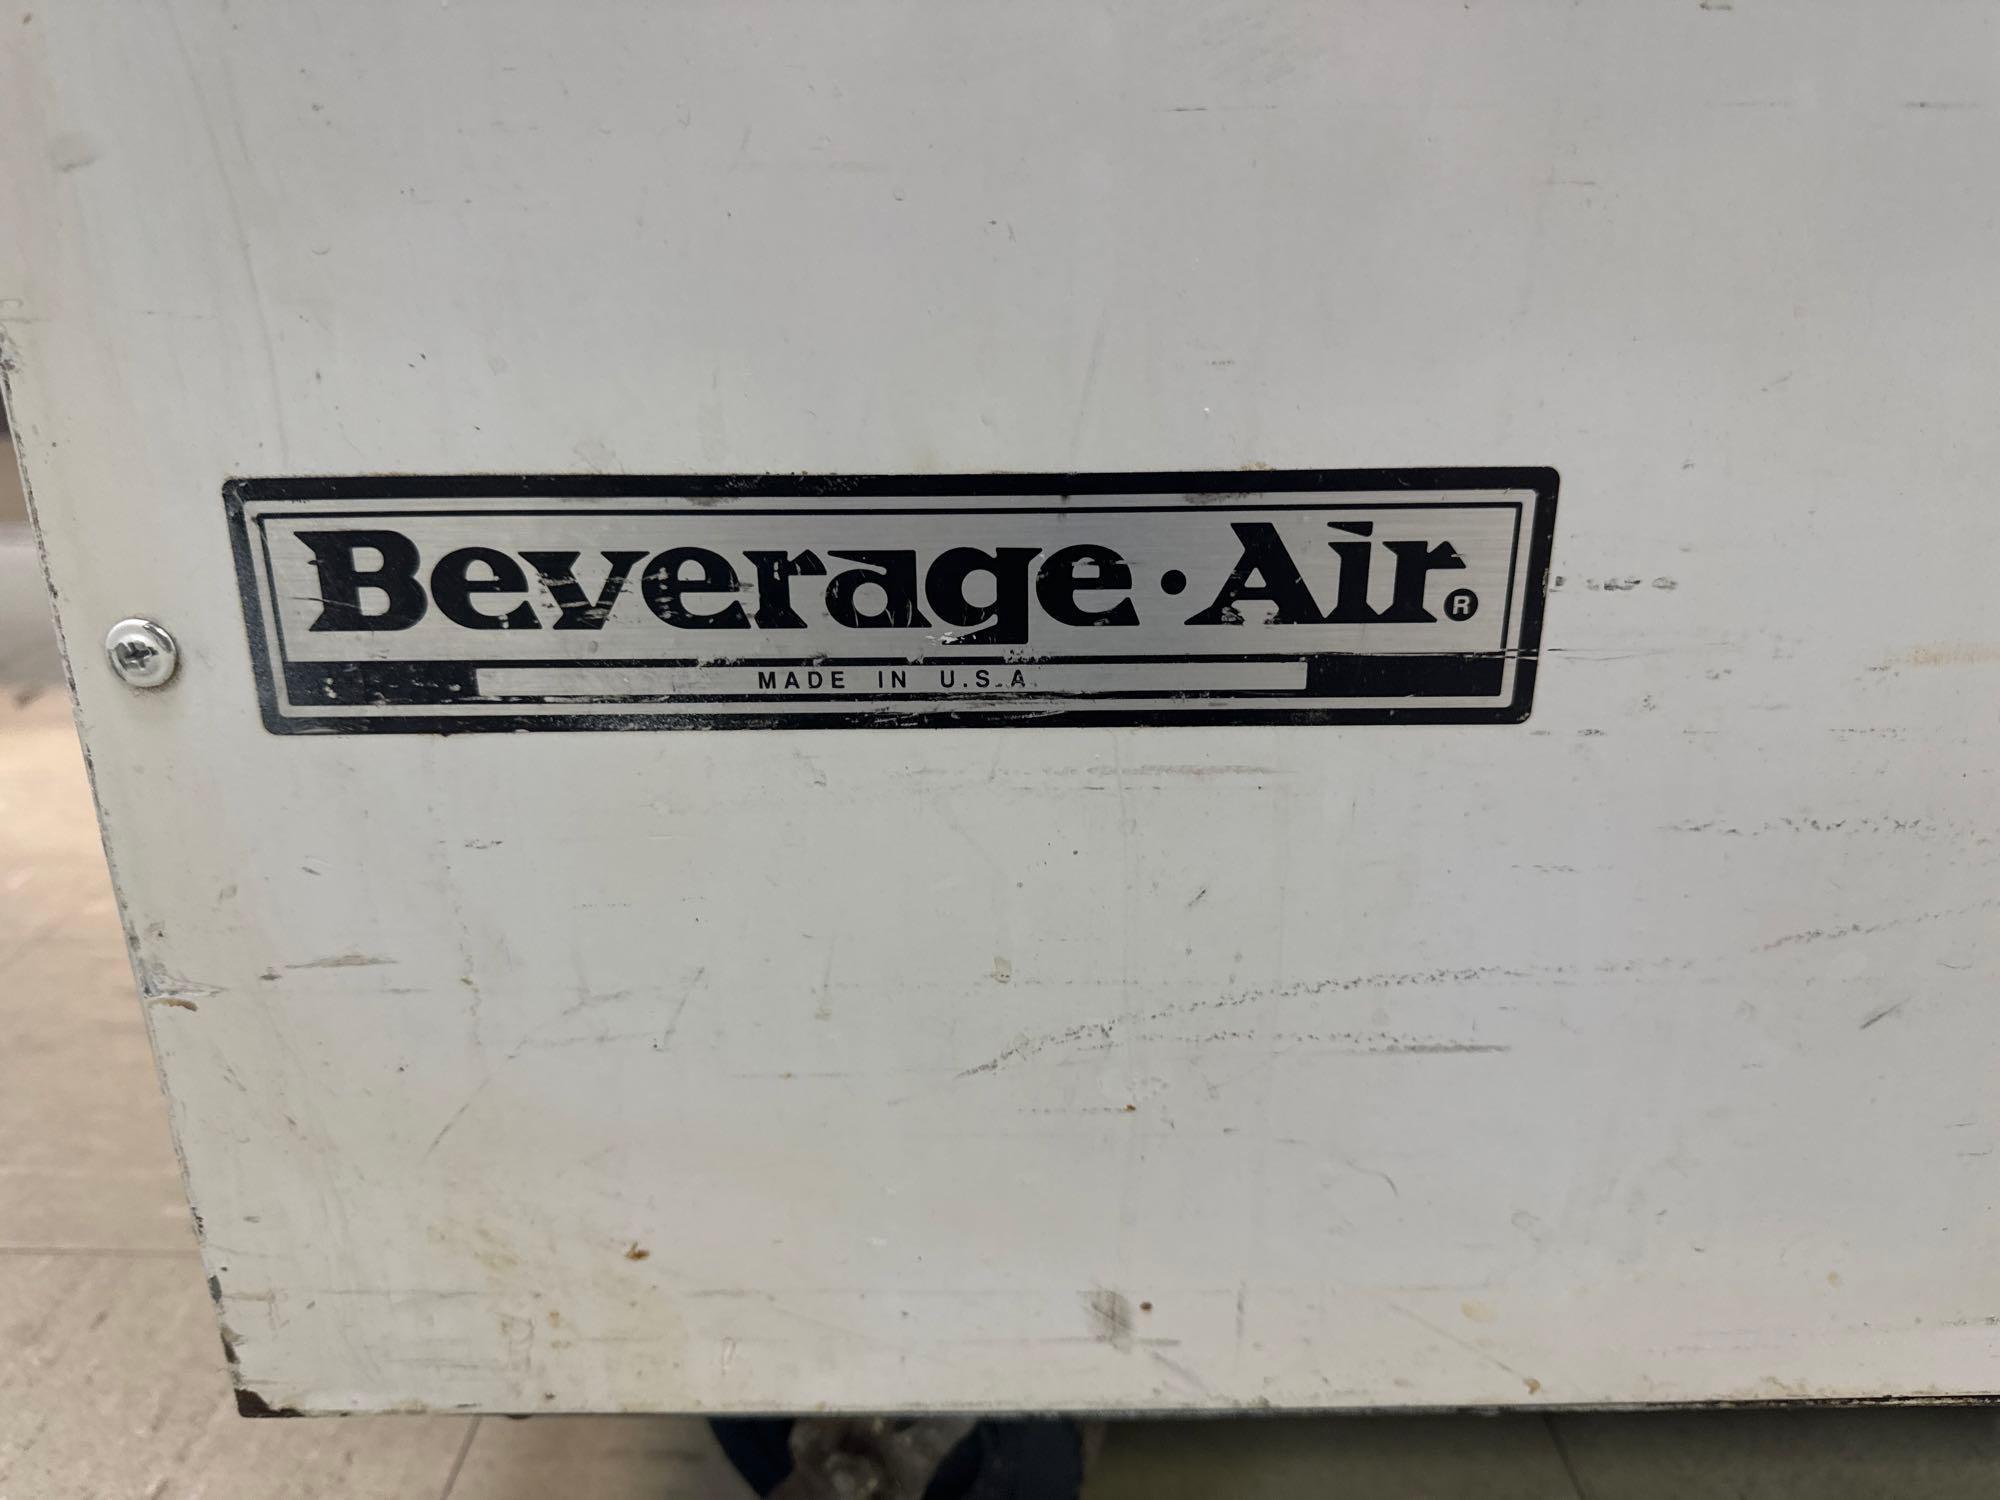 Beverage Air Reiter Dairy drop front lift top refrigerator and or freezer